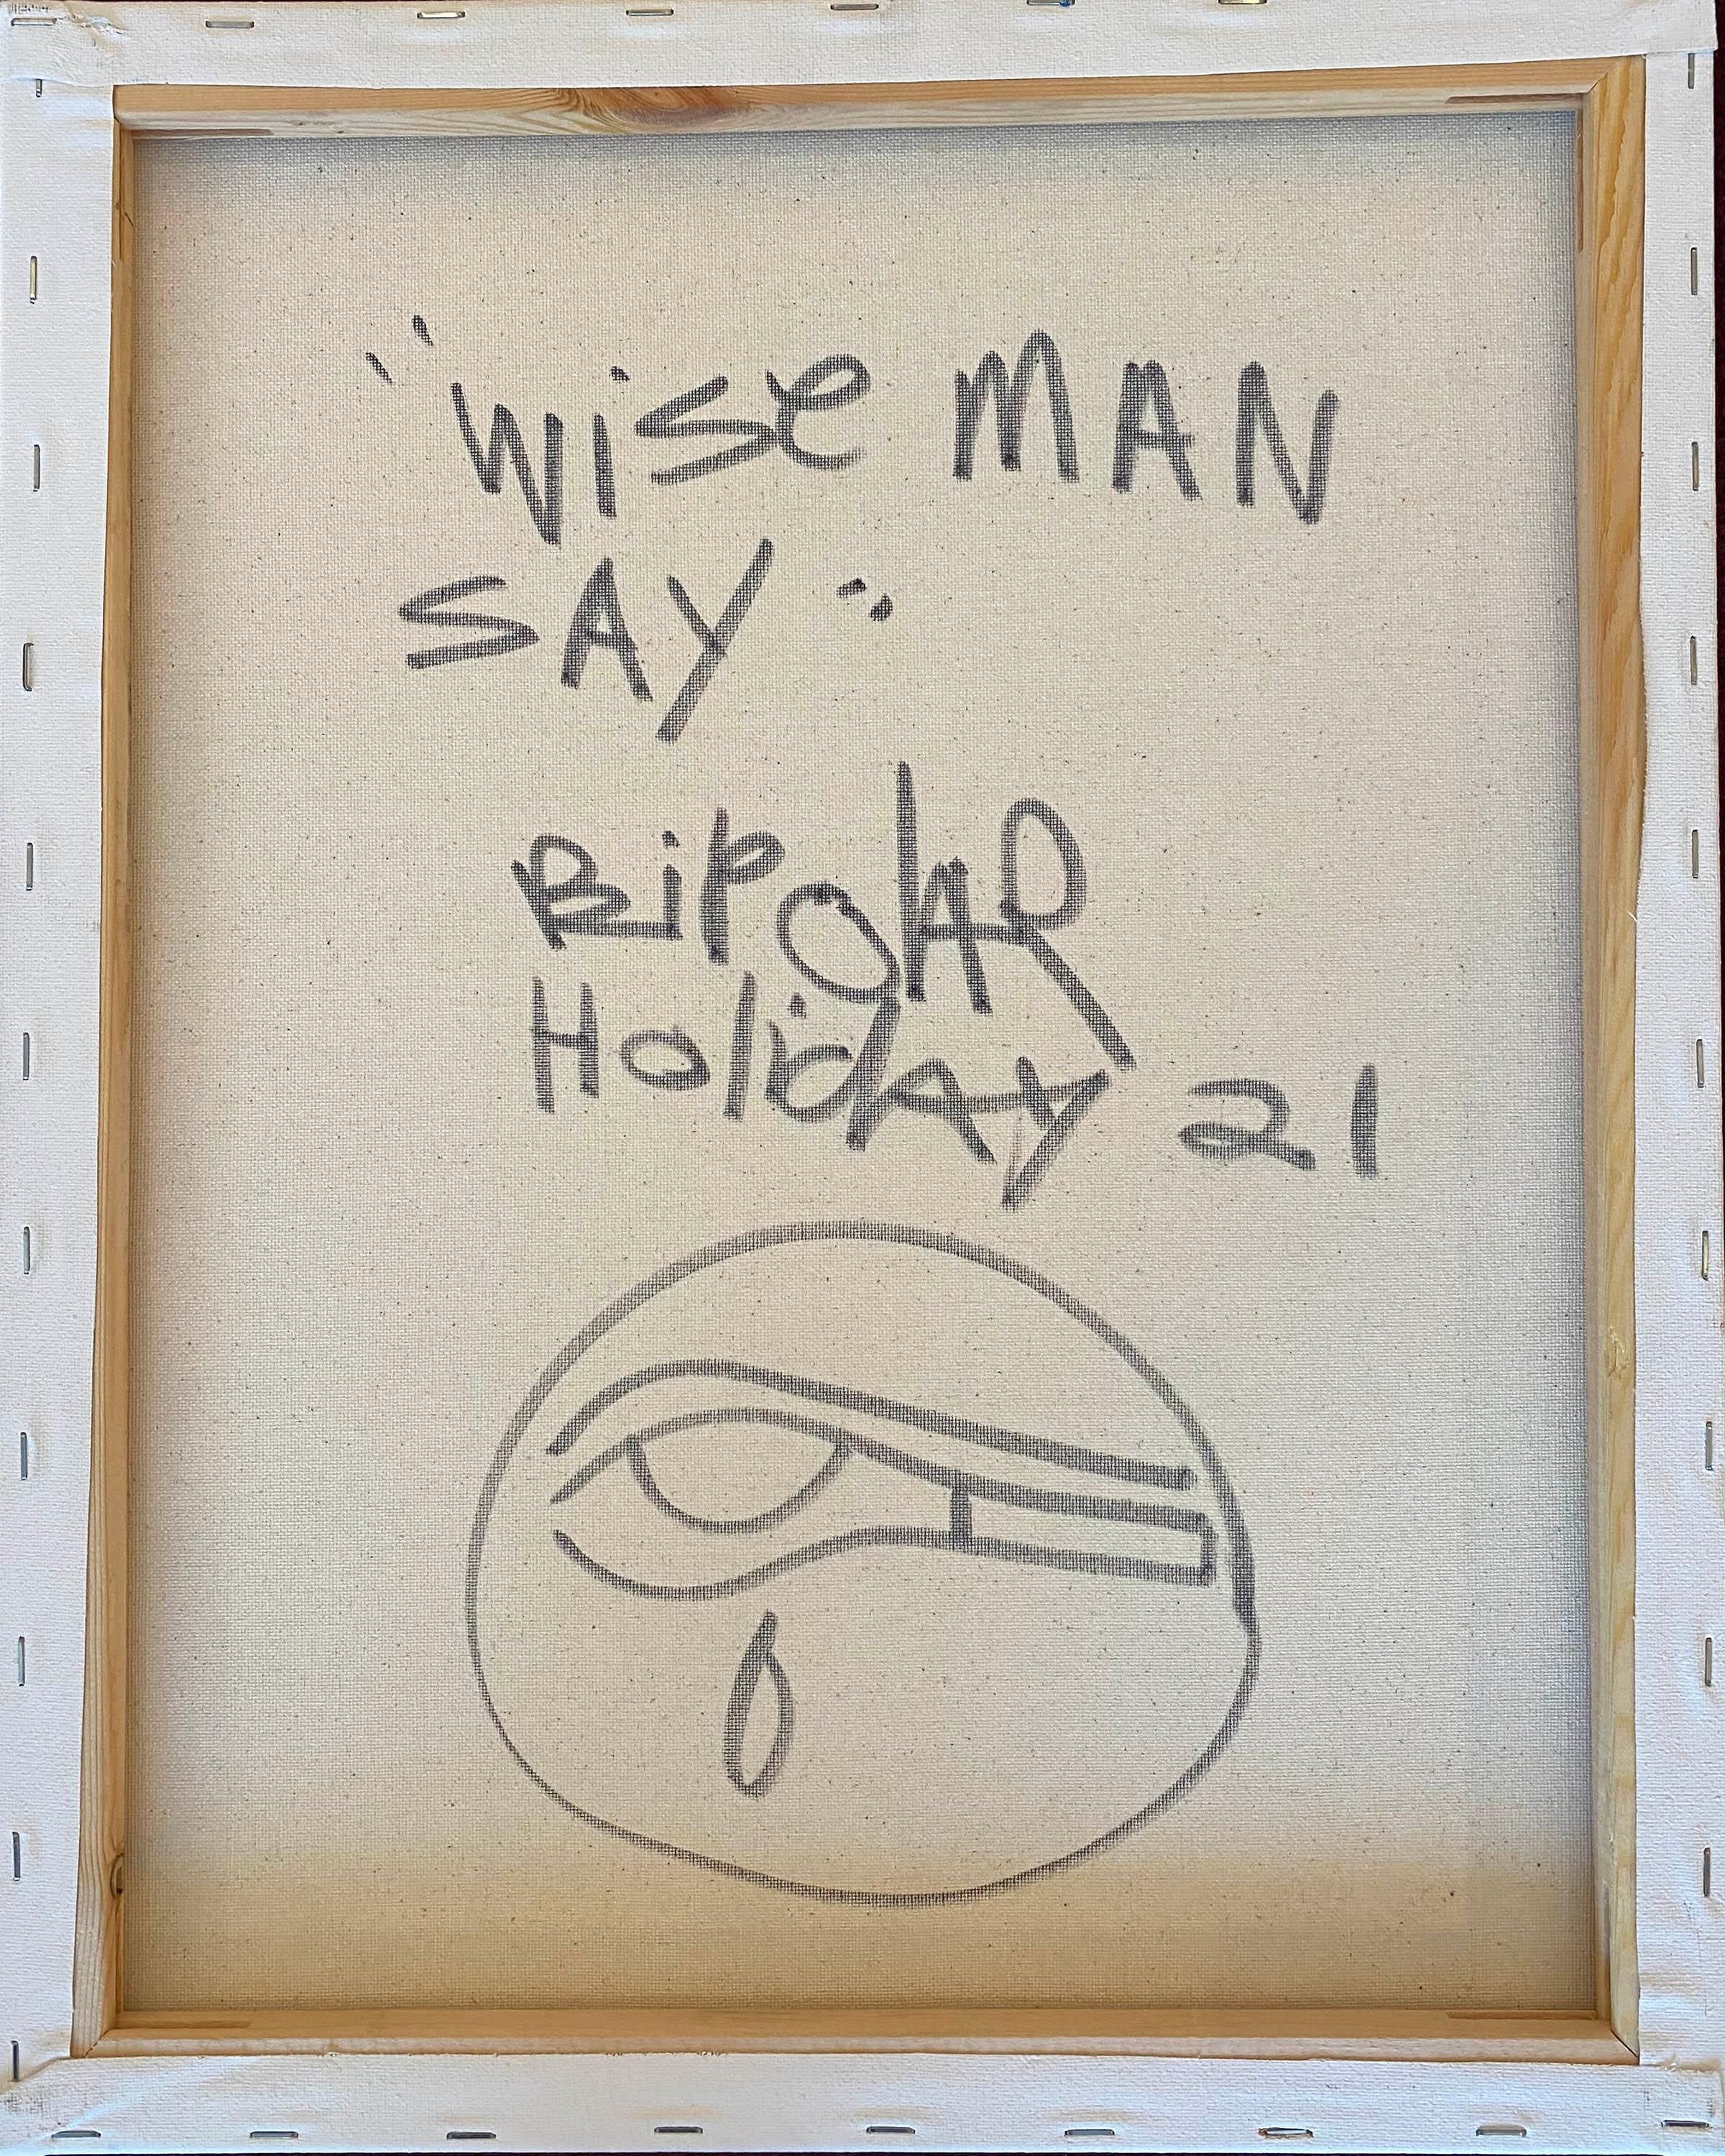 Wise Man Say - Painting by Bipolar Holiday